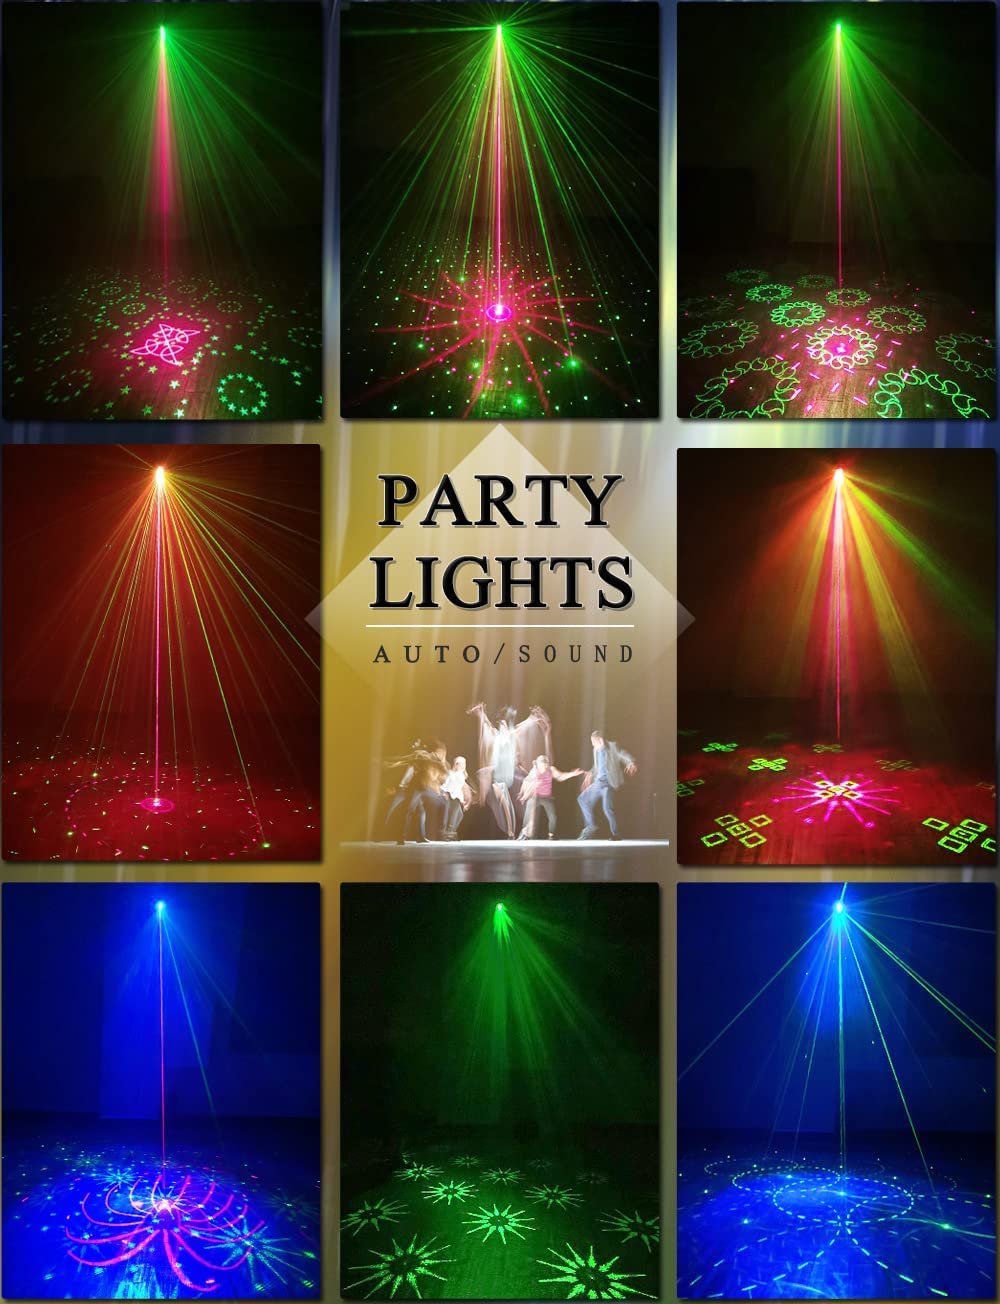 Party Lights Dj Disco Lights, Sound Activated Lights with Remote Control for Dance Party Karaoke Living Room Pub